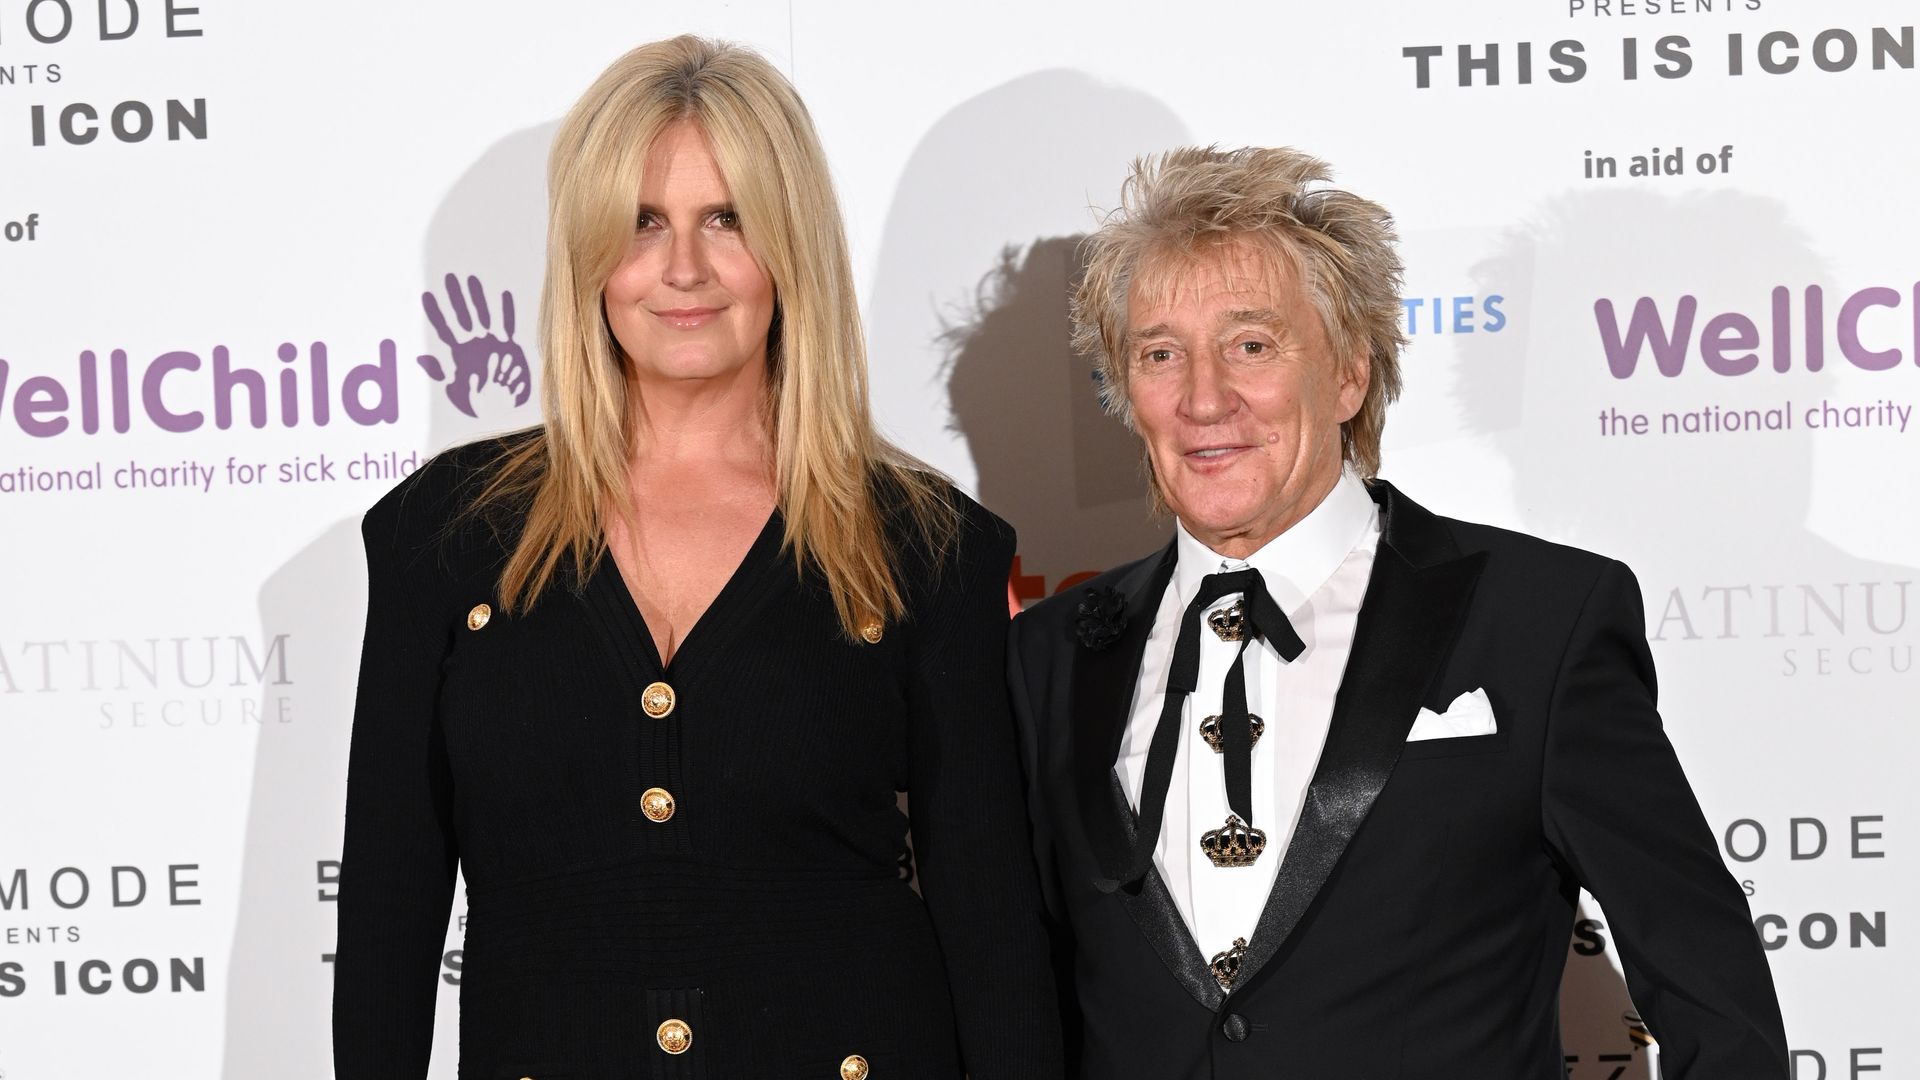 Penny Lancaster and Rod Stewart in black outfits